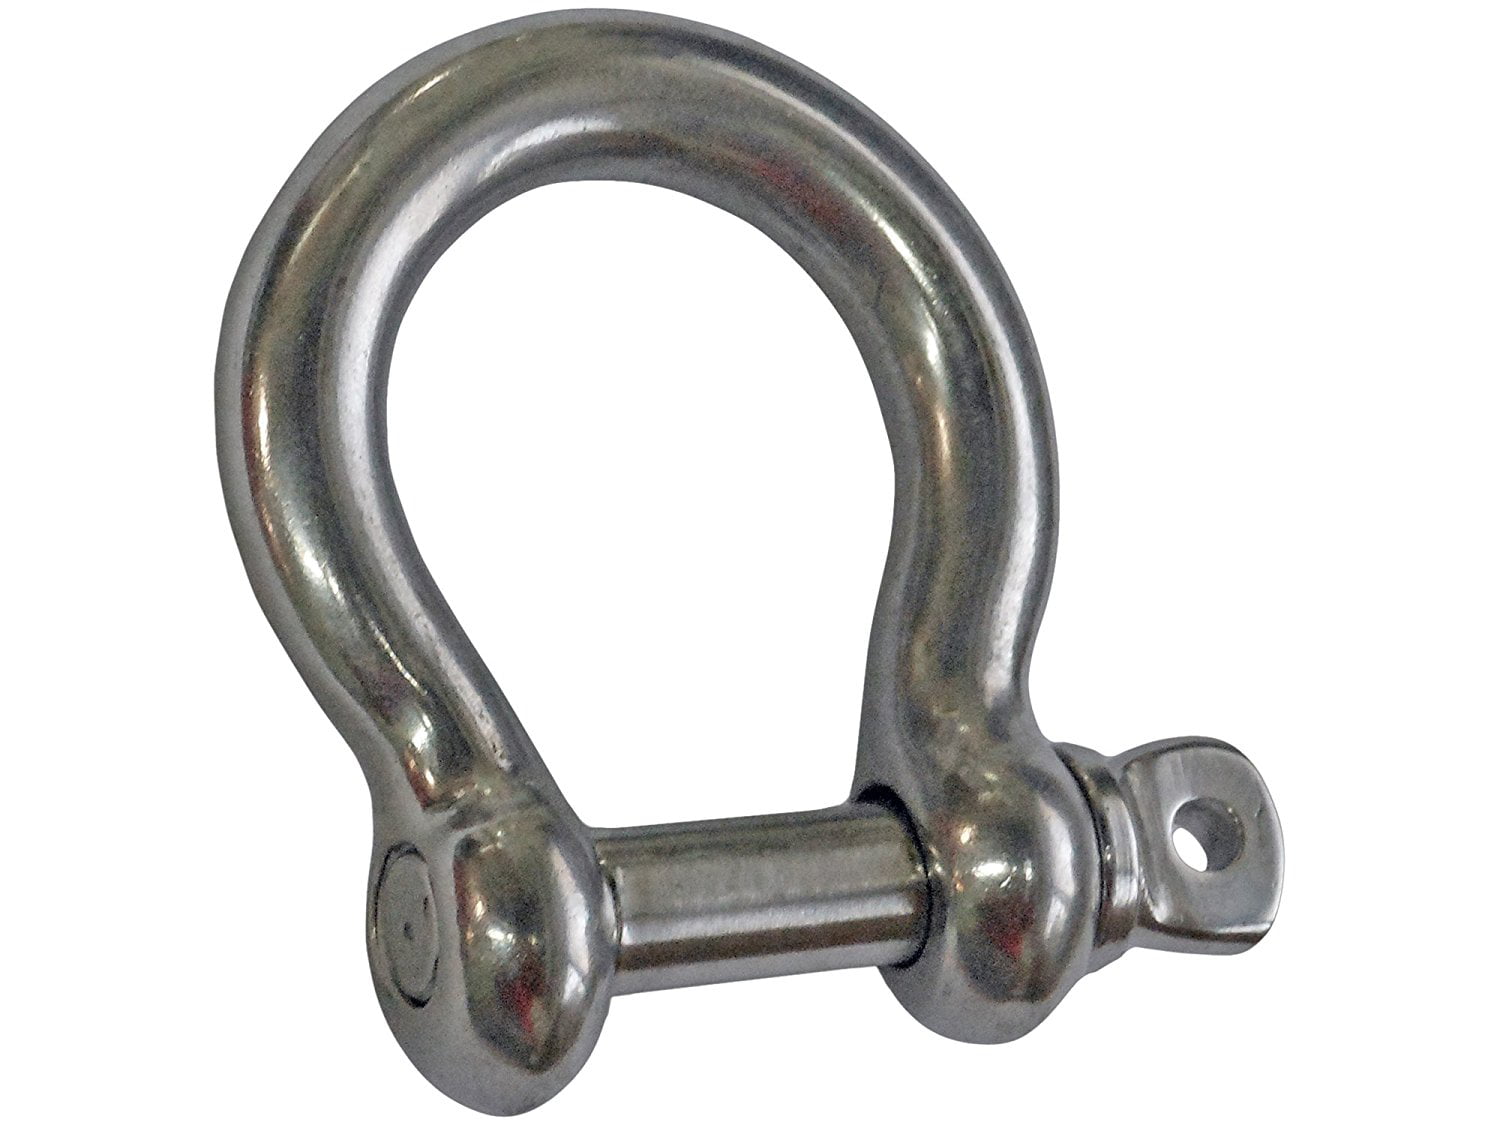 Marine Chain Rigging Bow Shackle Captive Pin For Boat 304 Stainless Steel 